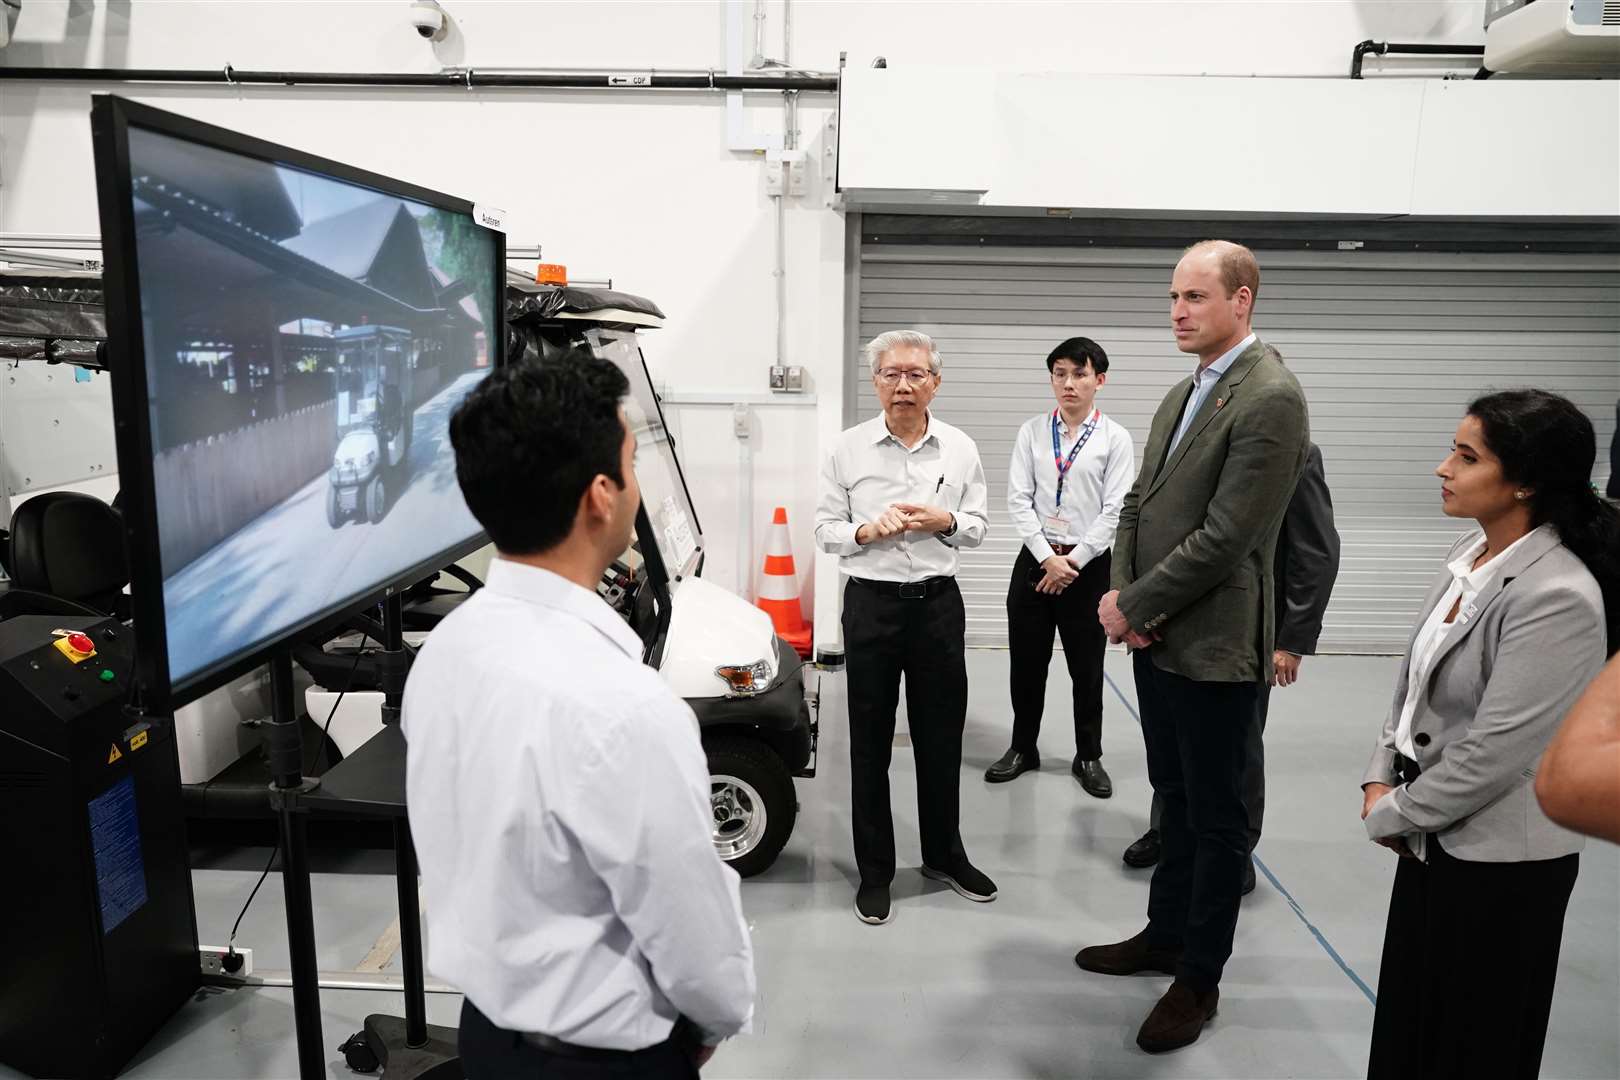 William during his visit to EcoLabs Centre of Innovation for Energy at Nanyang Technological University in Singapore (Jordan Pettitt/PA)